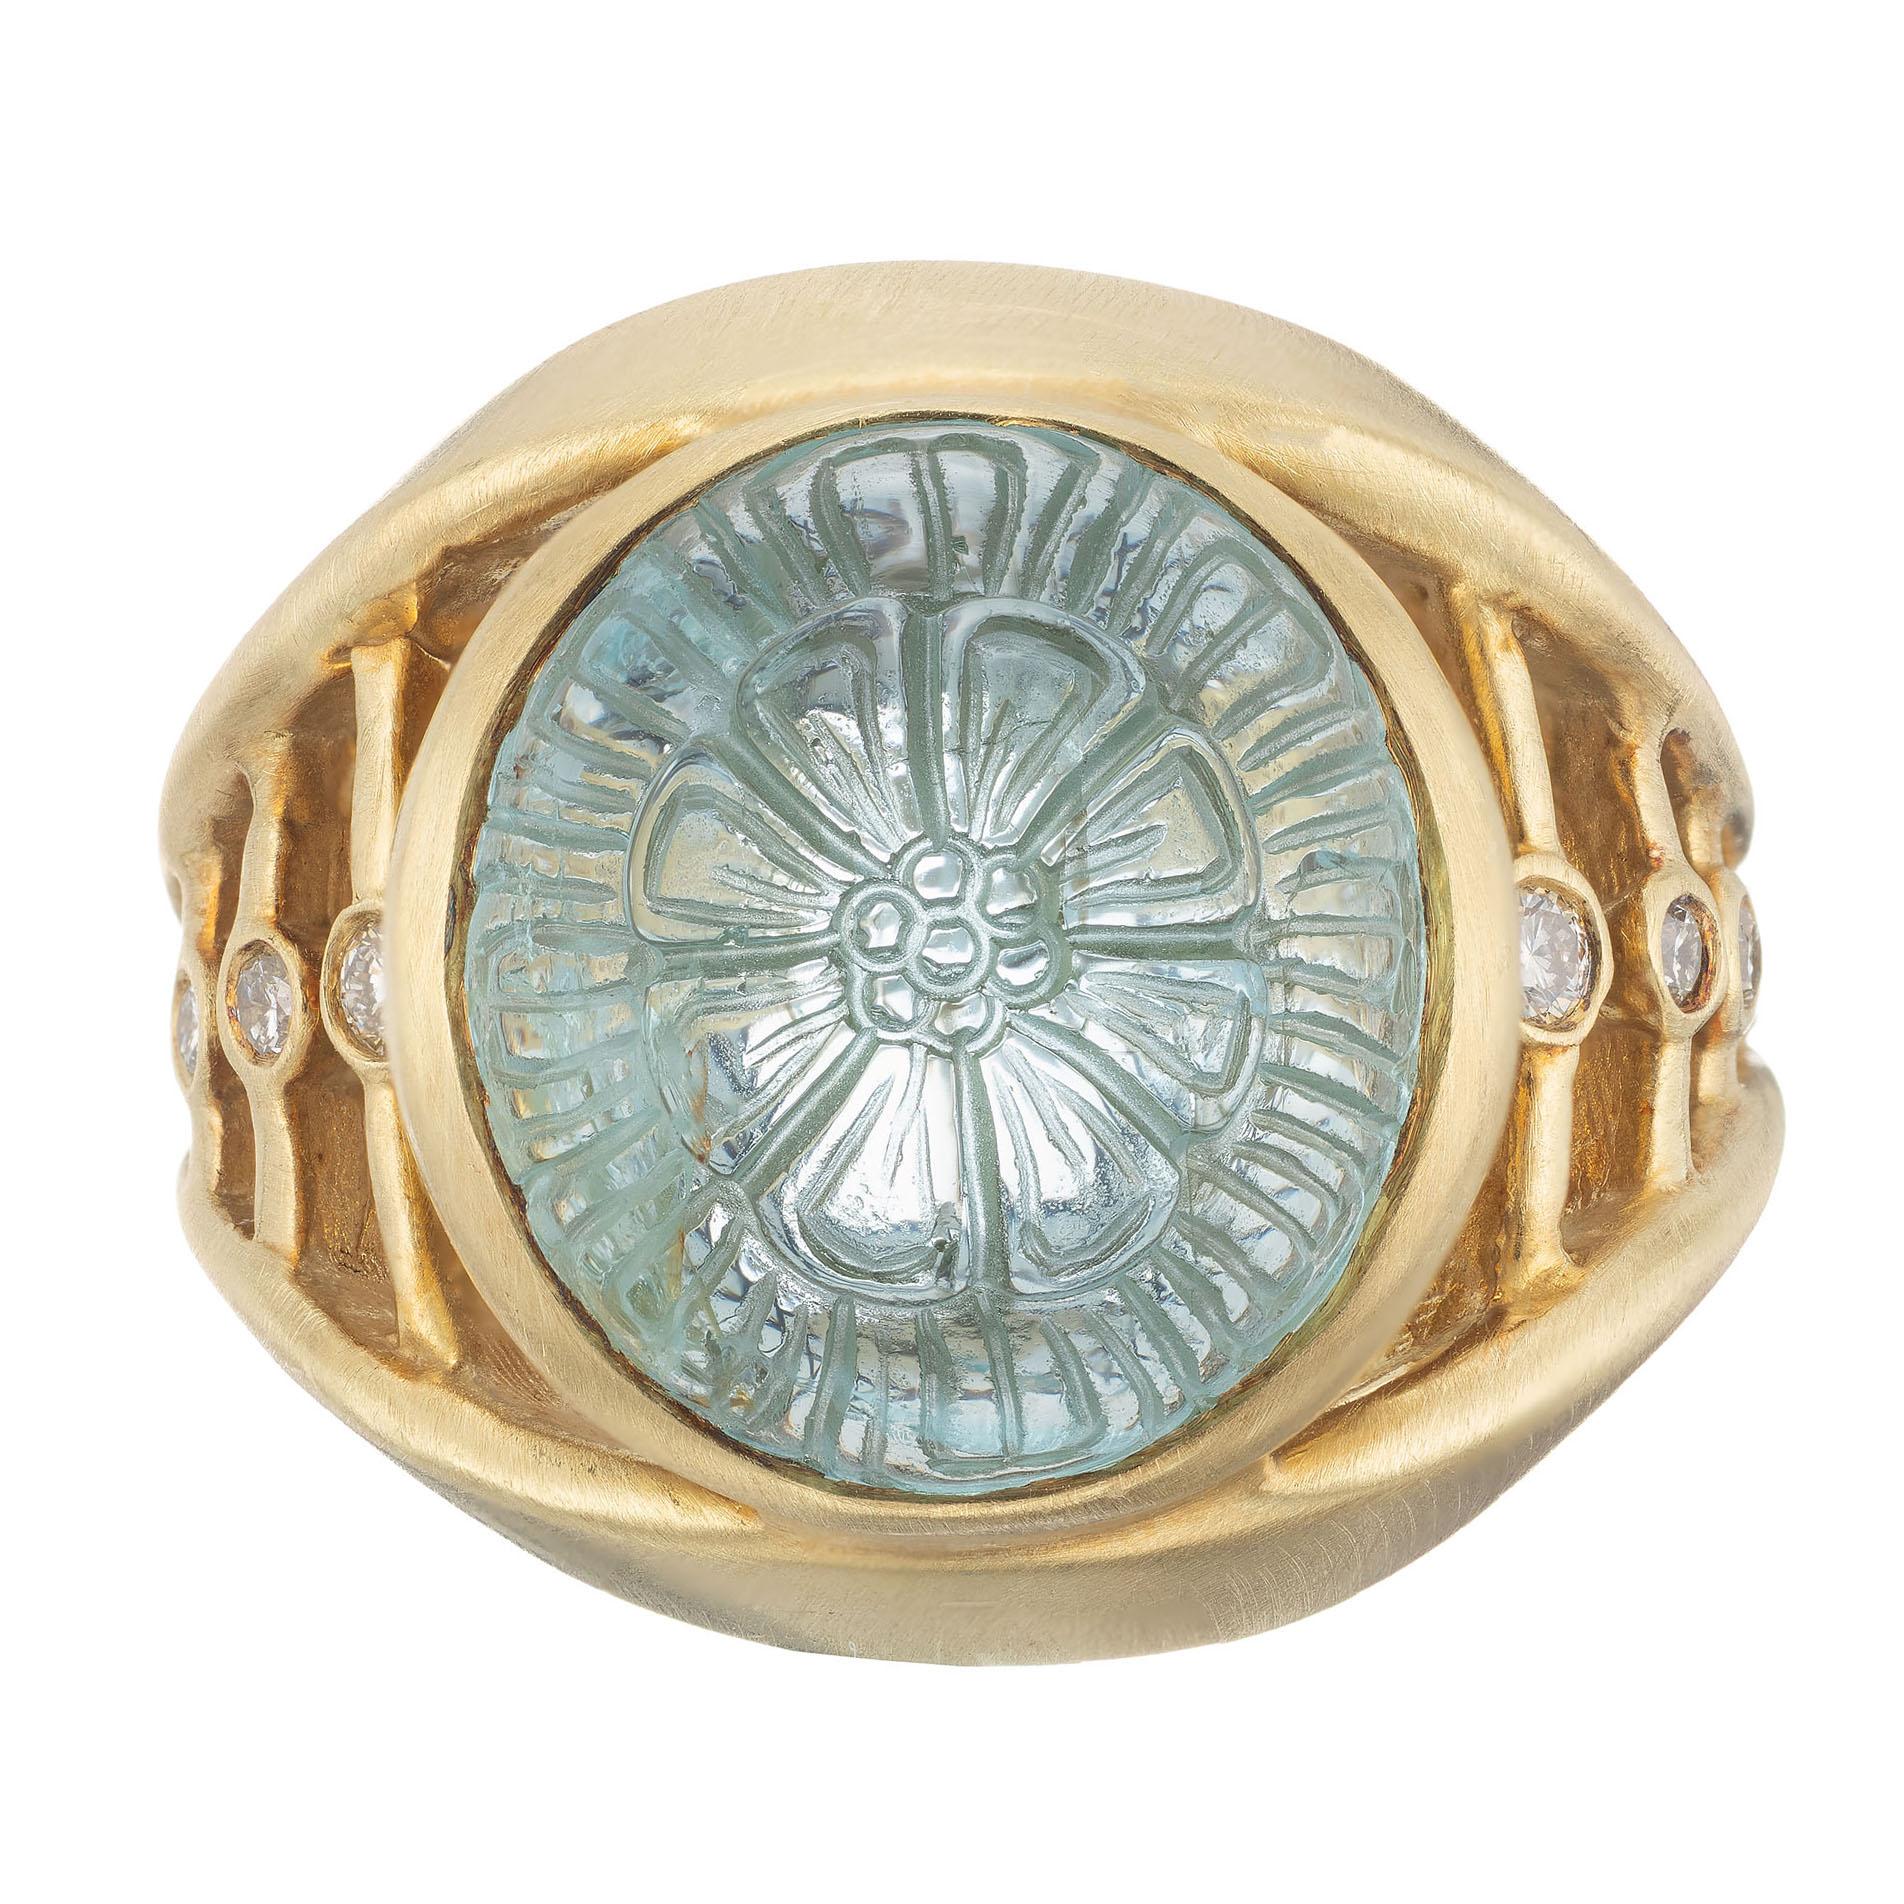 Robin Rotenier 18k yellow gold brush finish ring set with a carved dome aquamarine with diamond accents.

1 carved dome cabochon blue aquamarine, approx. 5.30cts
8 round brilliant cut diamonds G VS, approx. .12cts
Size 7 and sizable
18k yellow